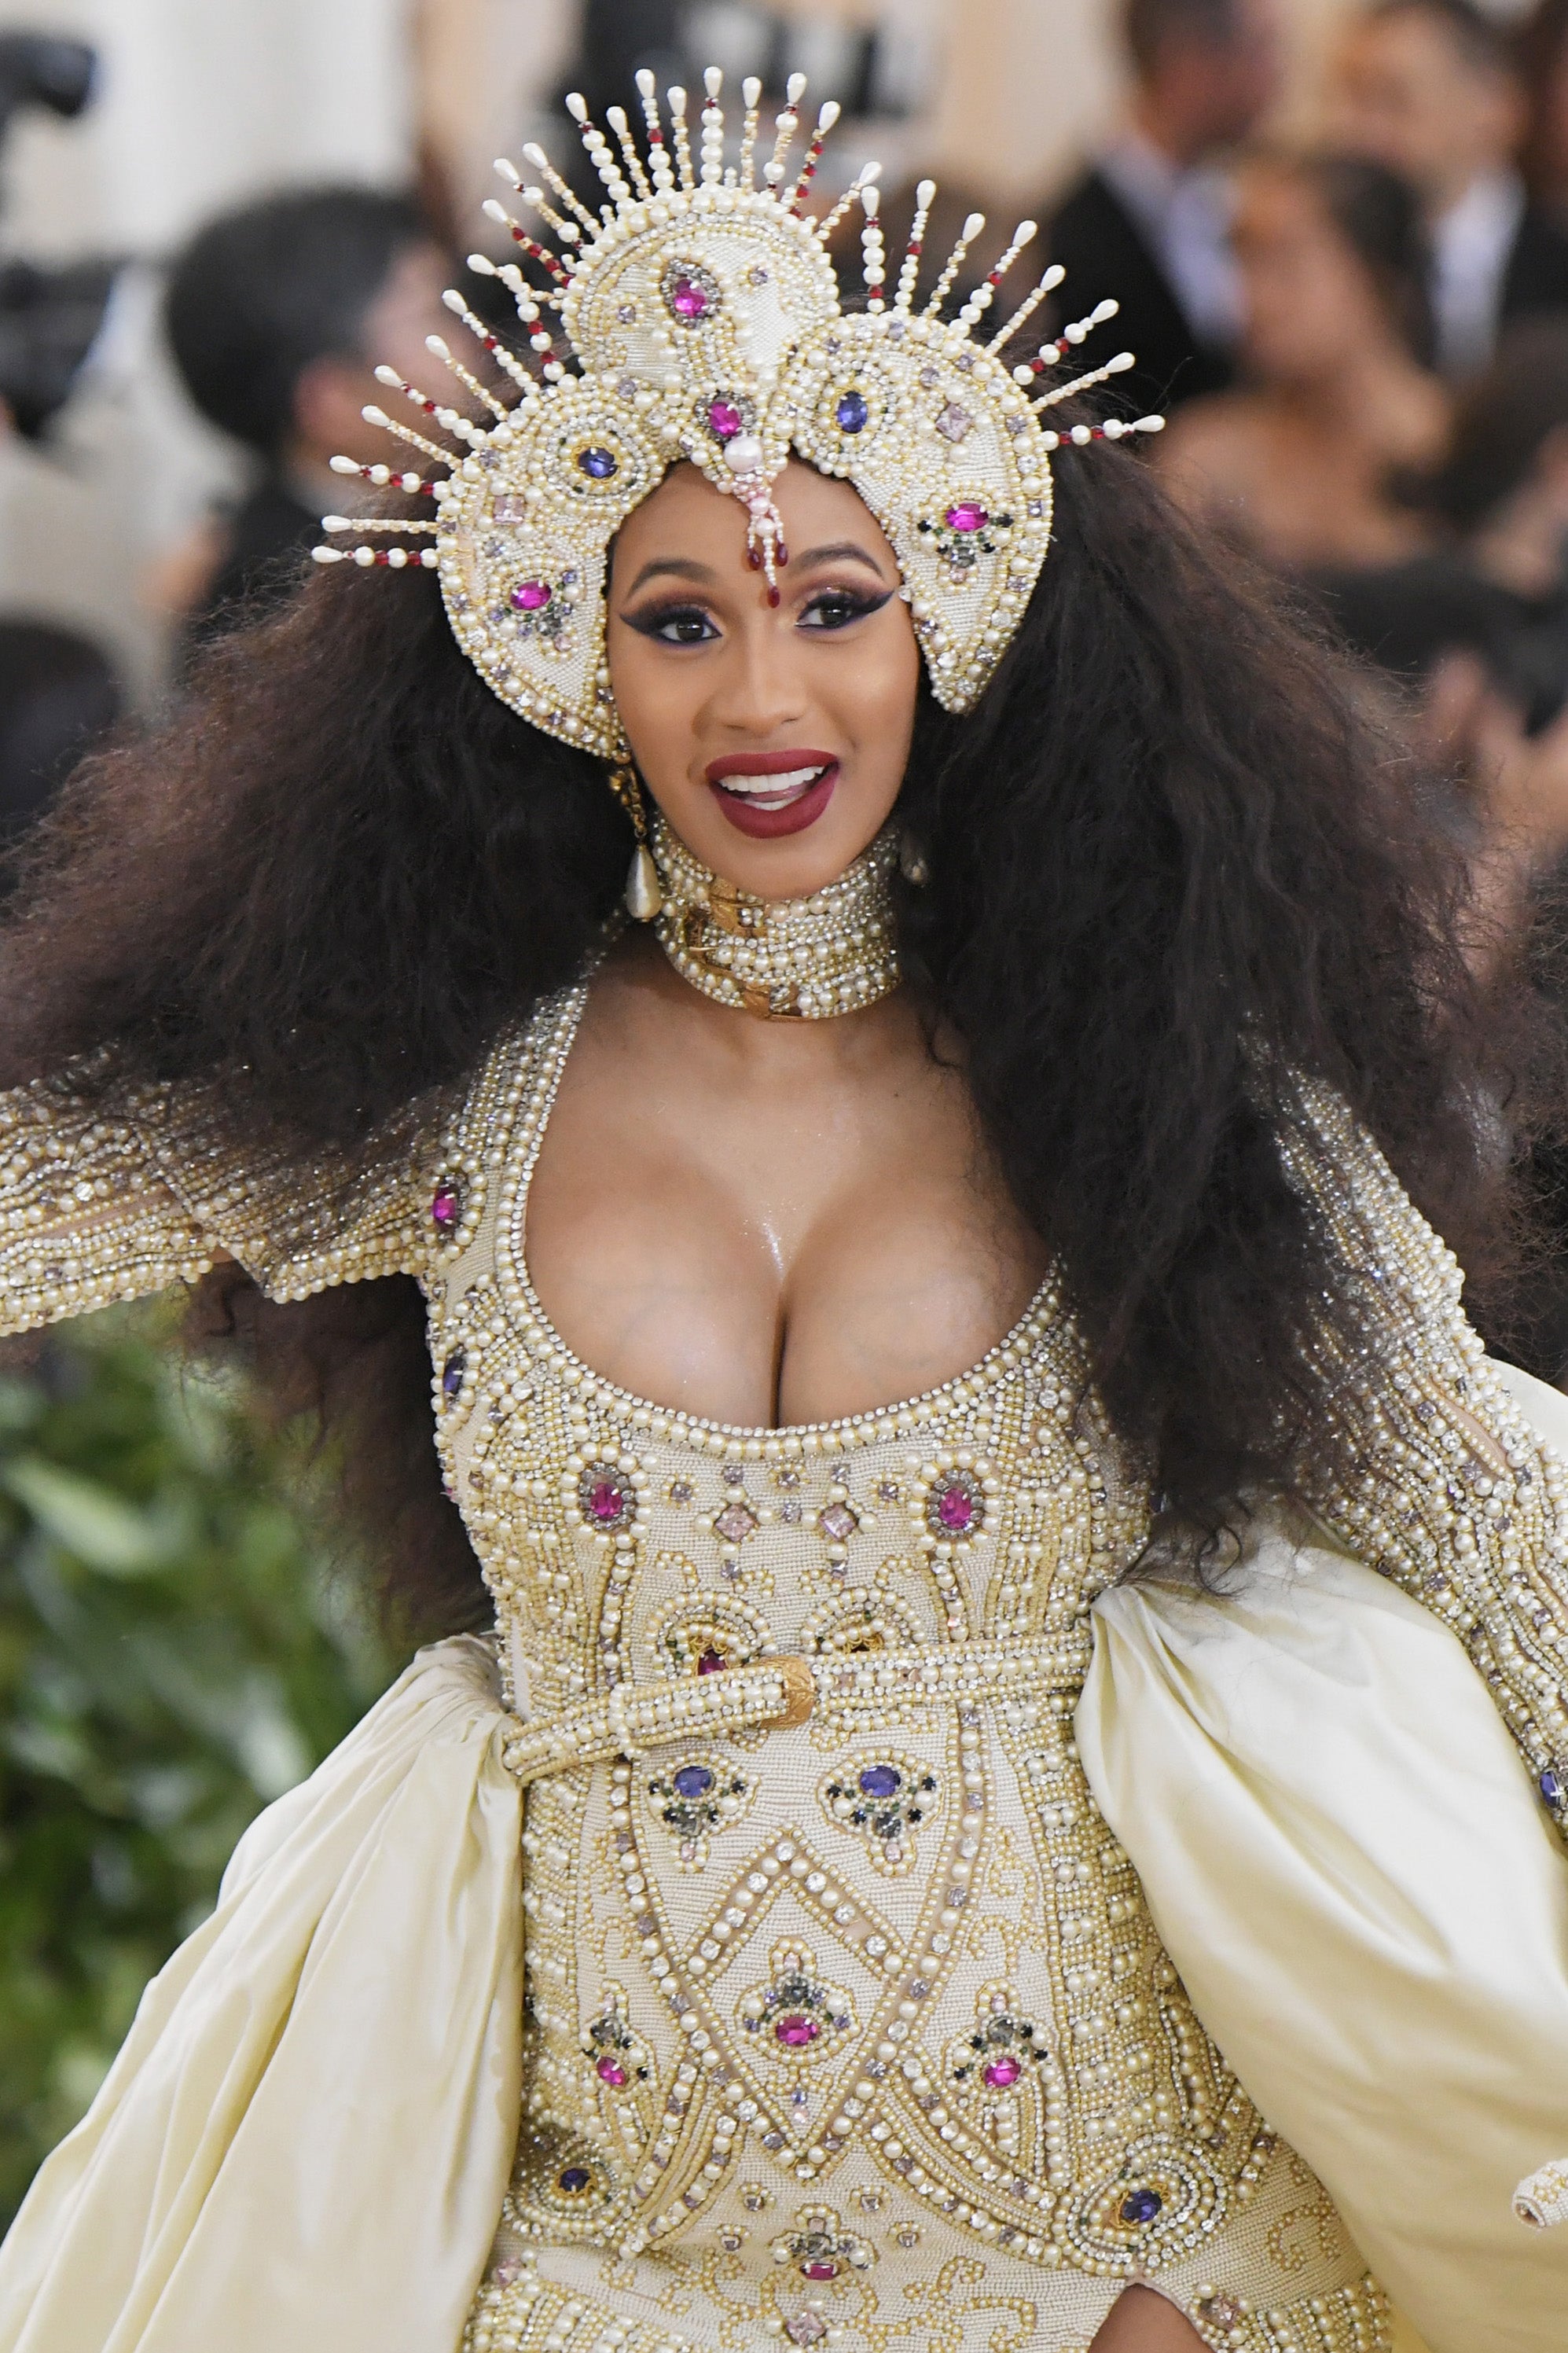 Cardi B Confirms She's Expecting A Baby Girl
